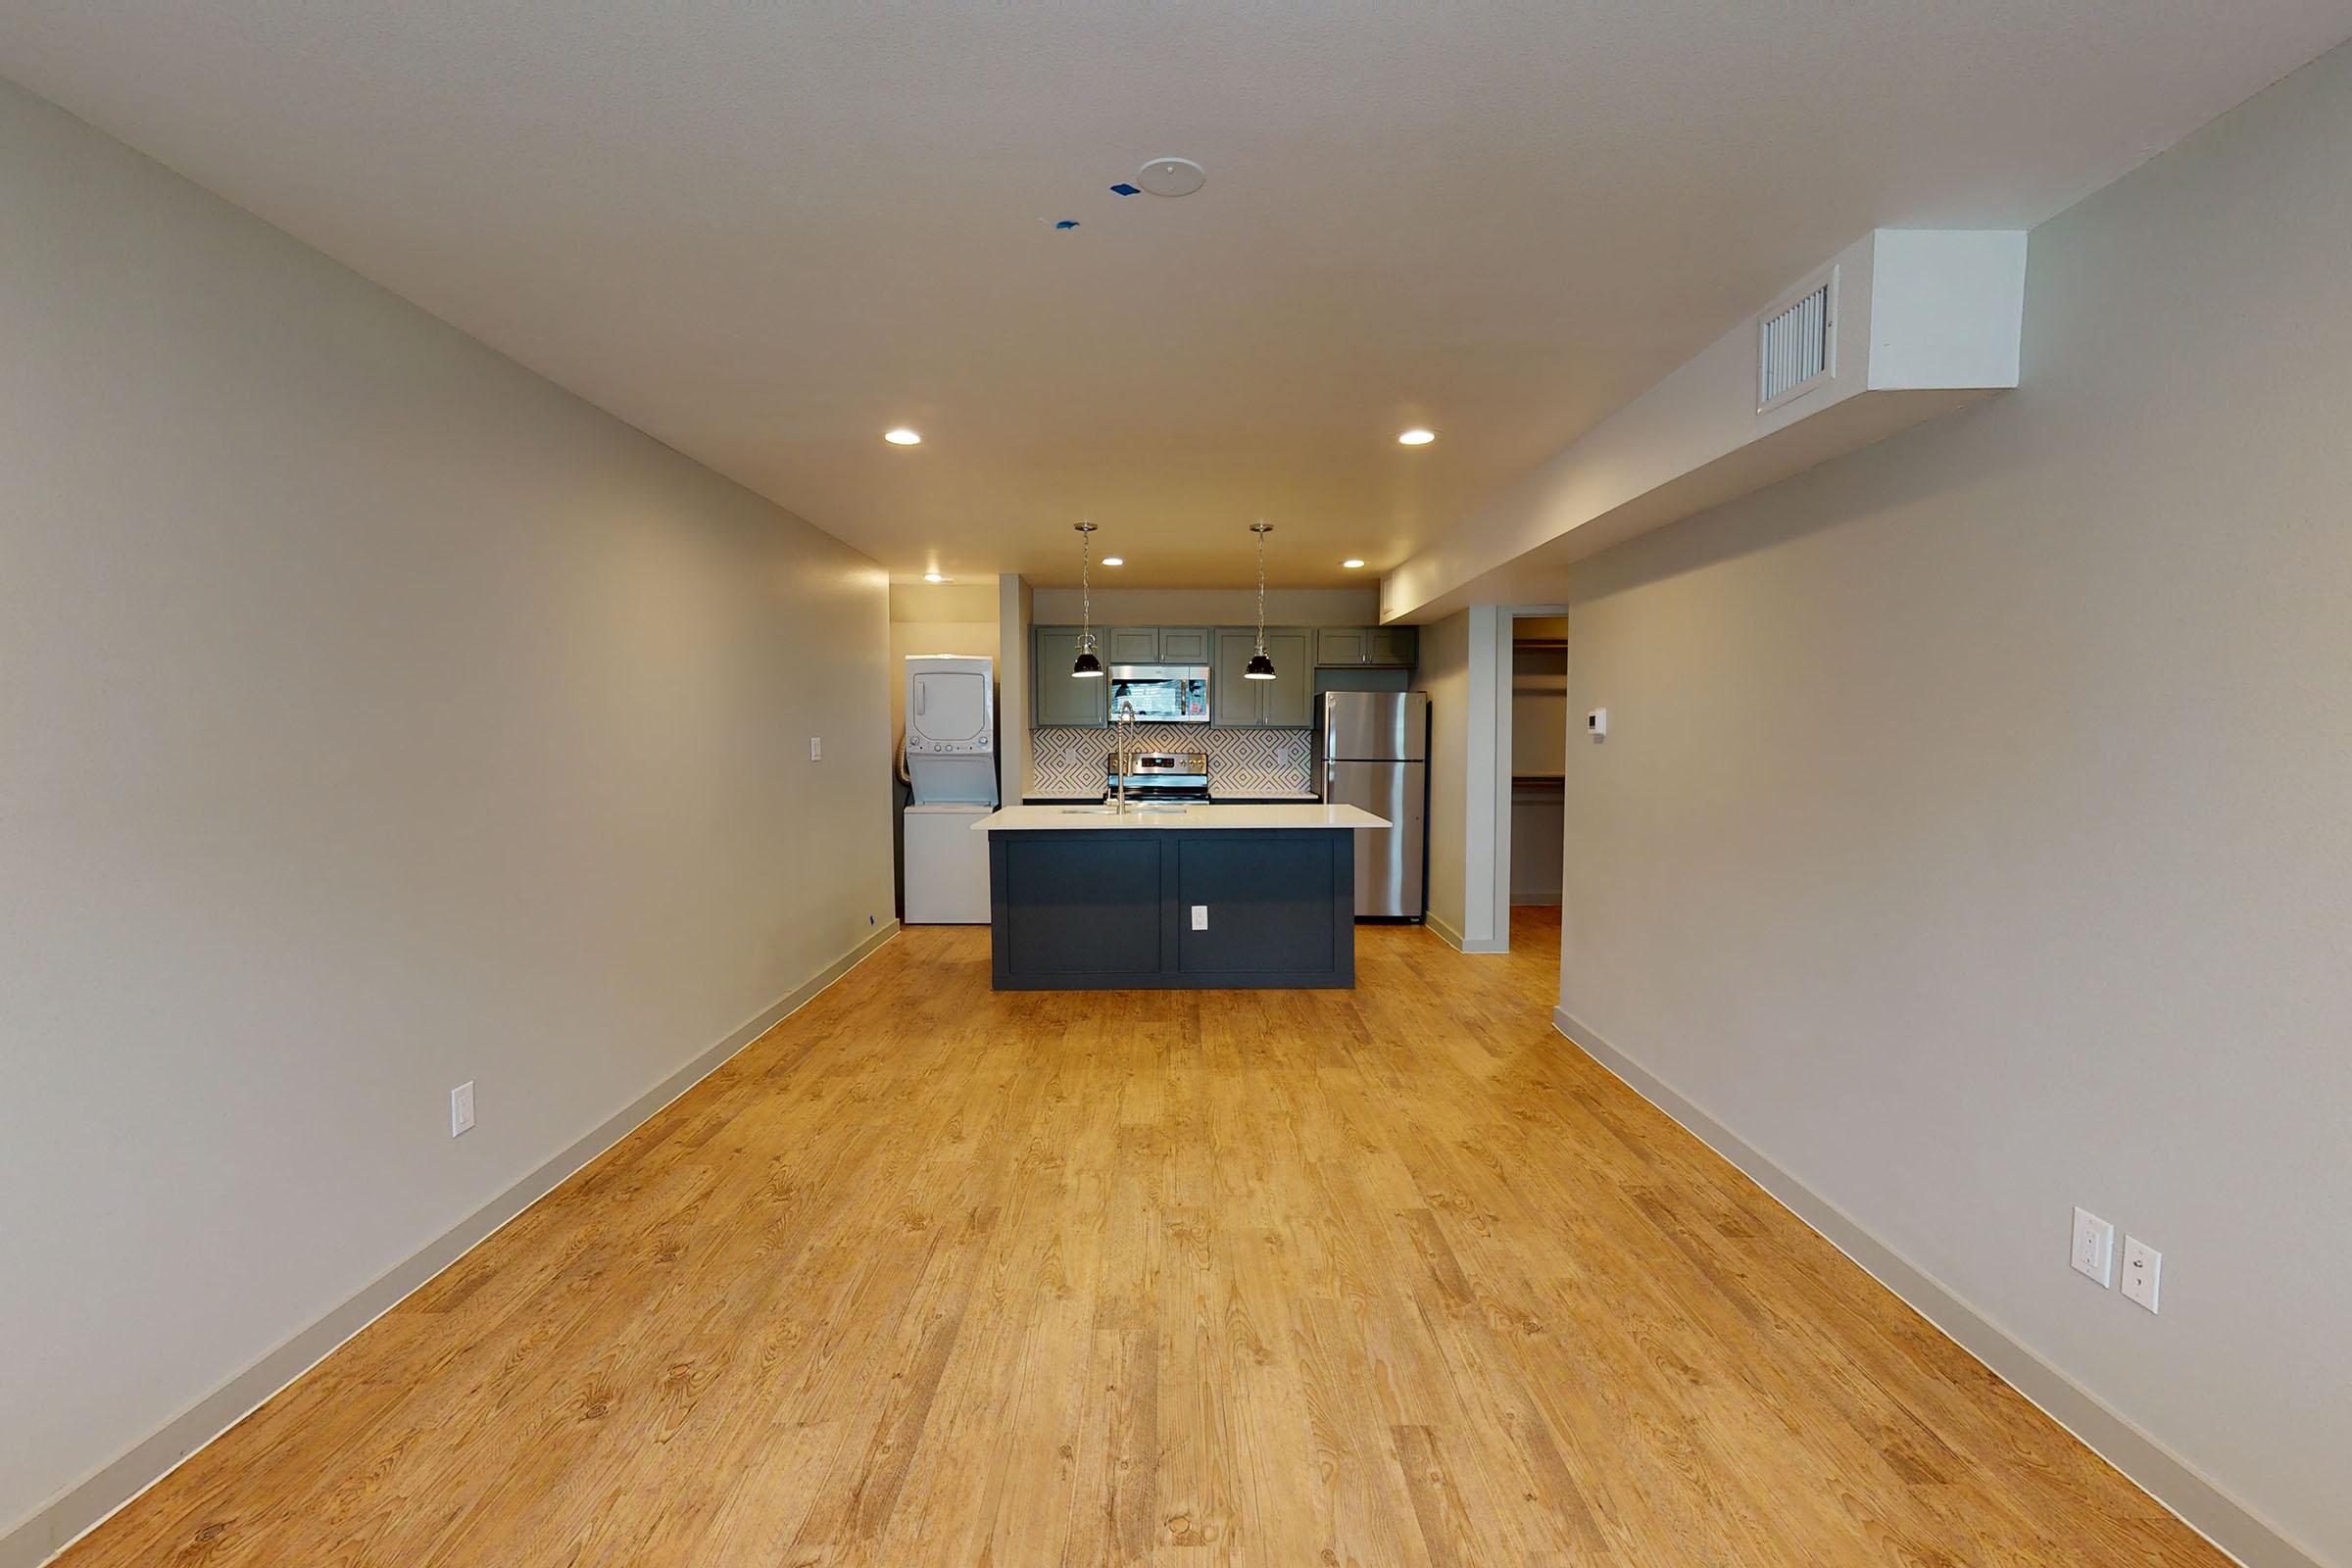 an unfurnished apartment with wooden floors